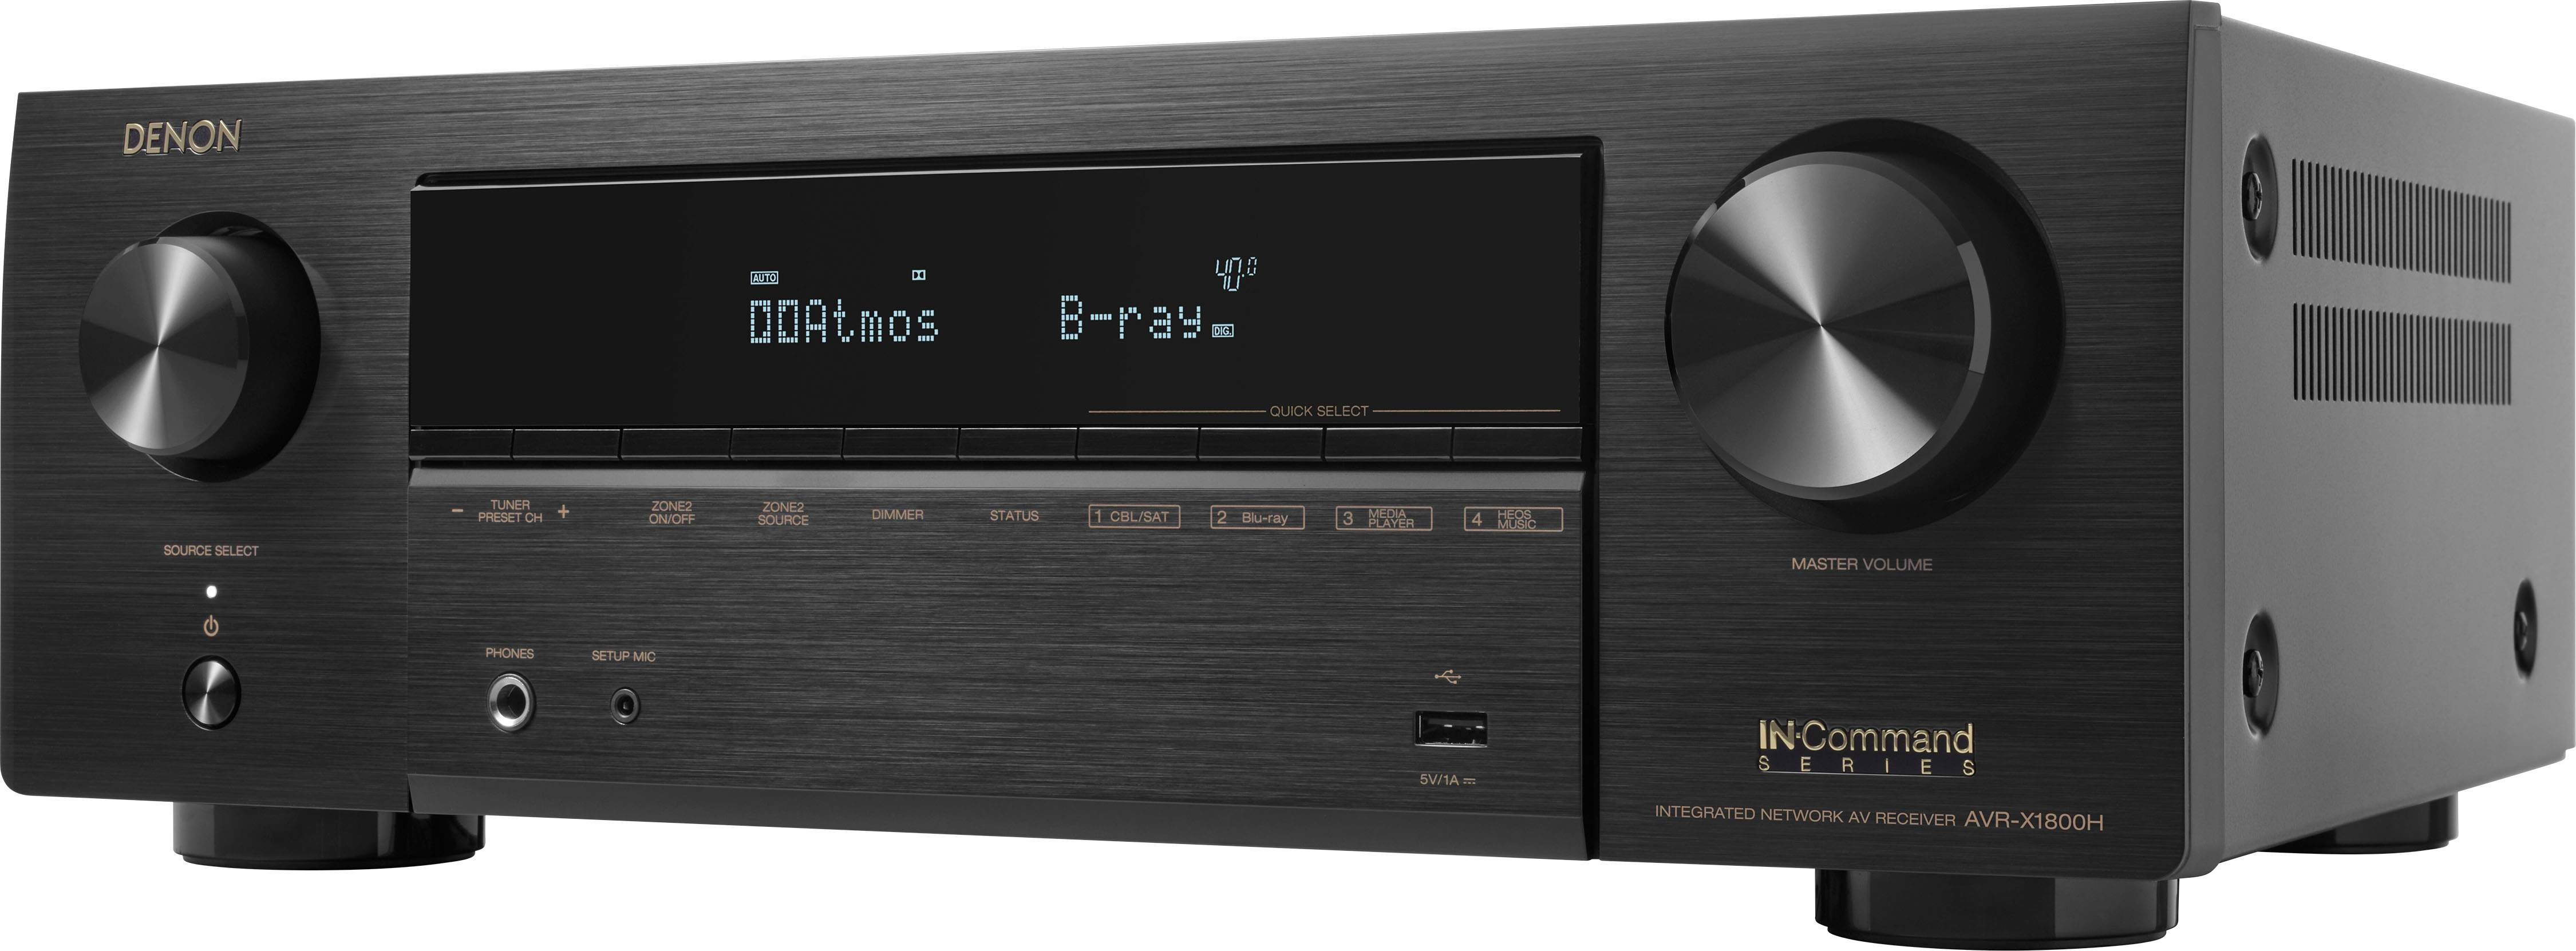 Ultra Best A/V Receiver 8K 80W Home Black HDR AVR-X1800H HD Buy - HEOS 7.2-Ch. with Built-In Compatible AVRX1800H Capable Bluetooth Theater Denon